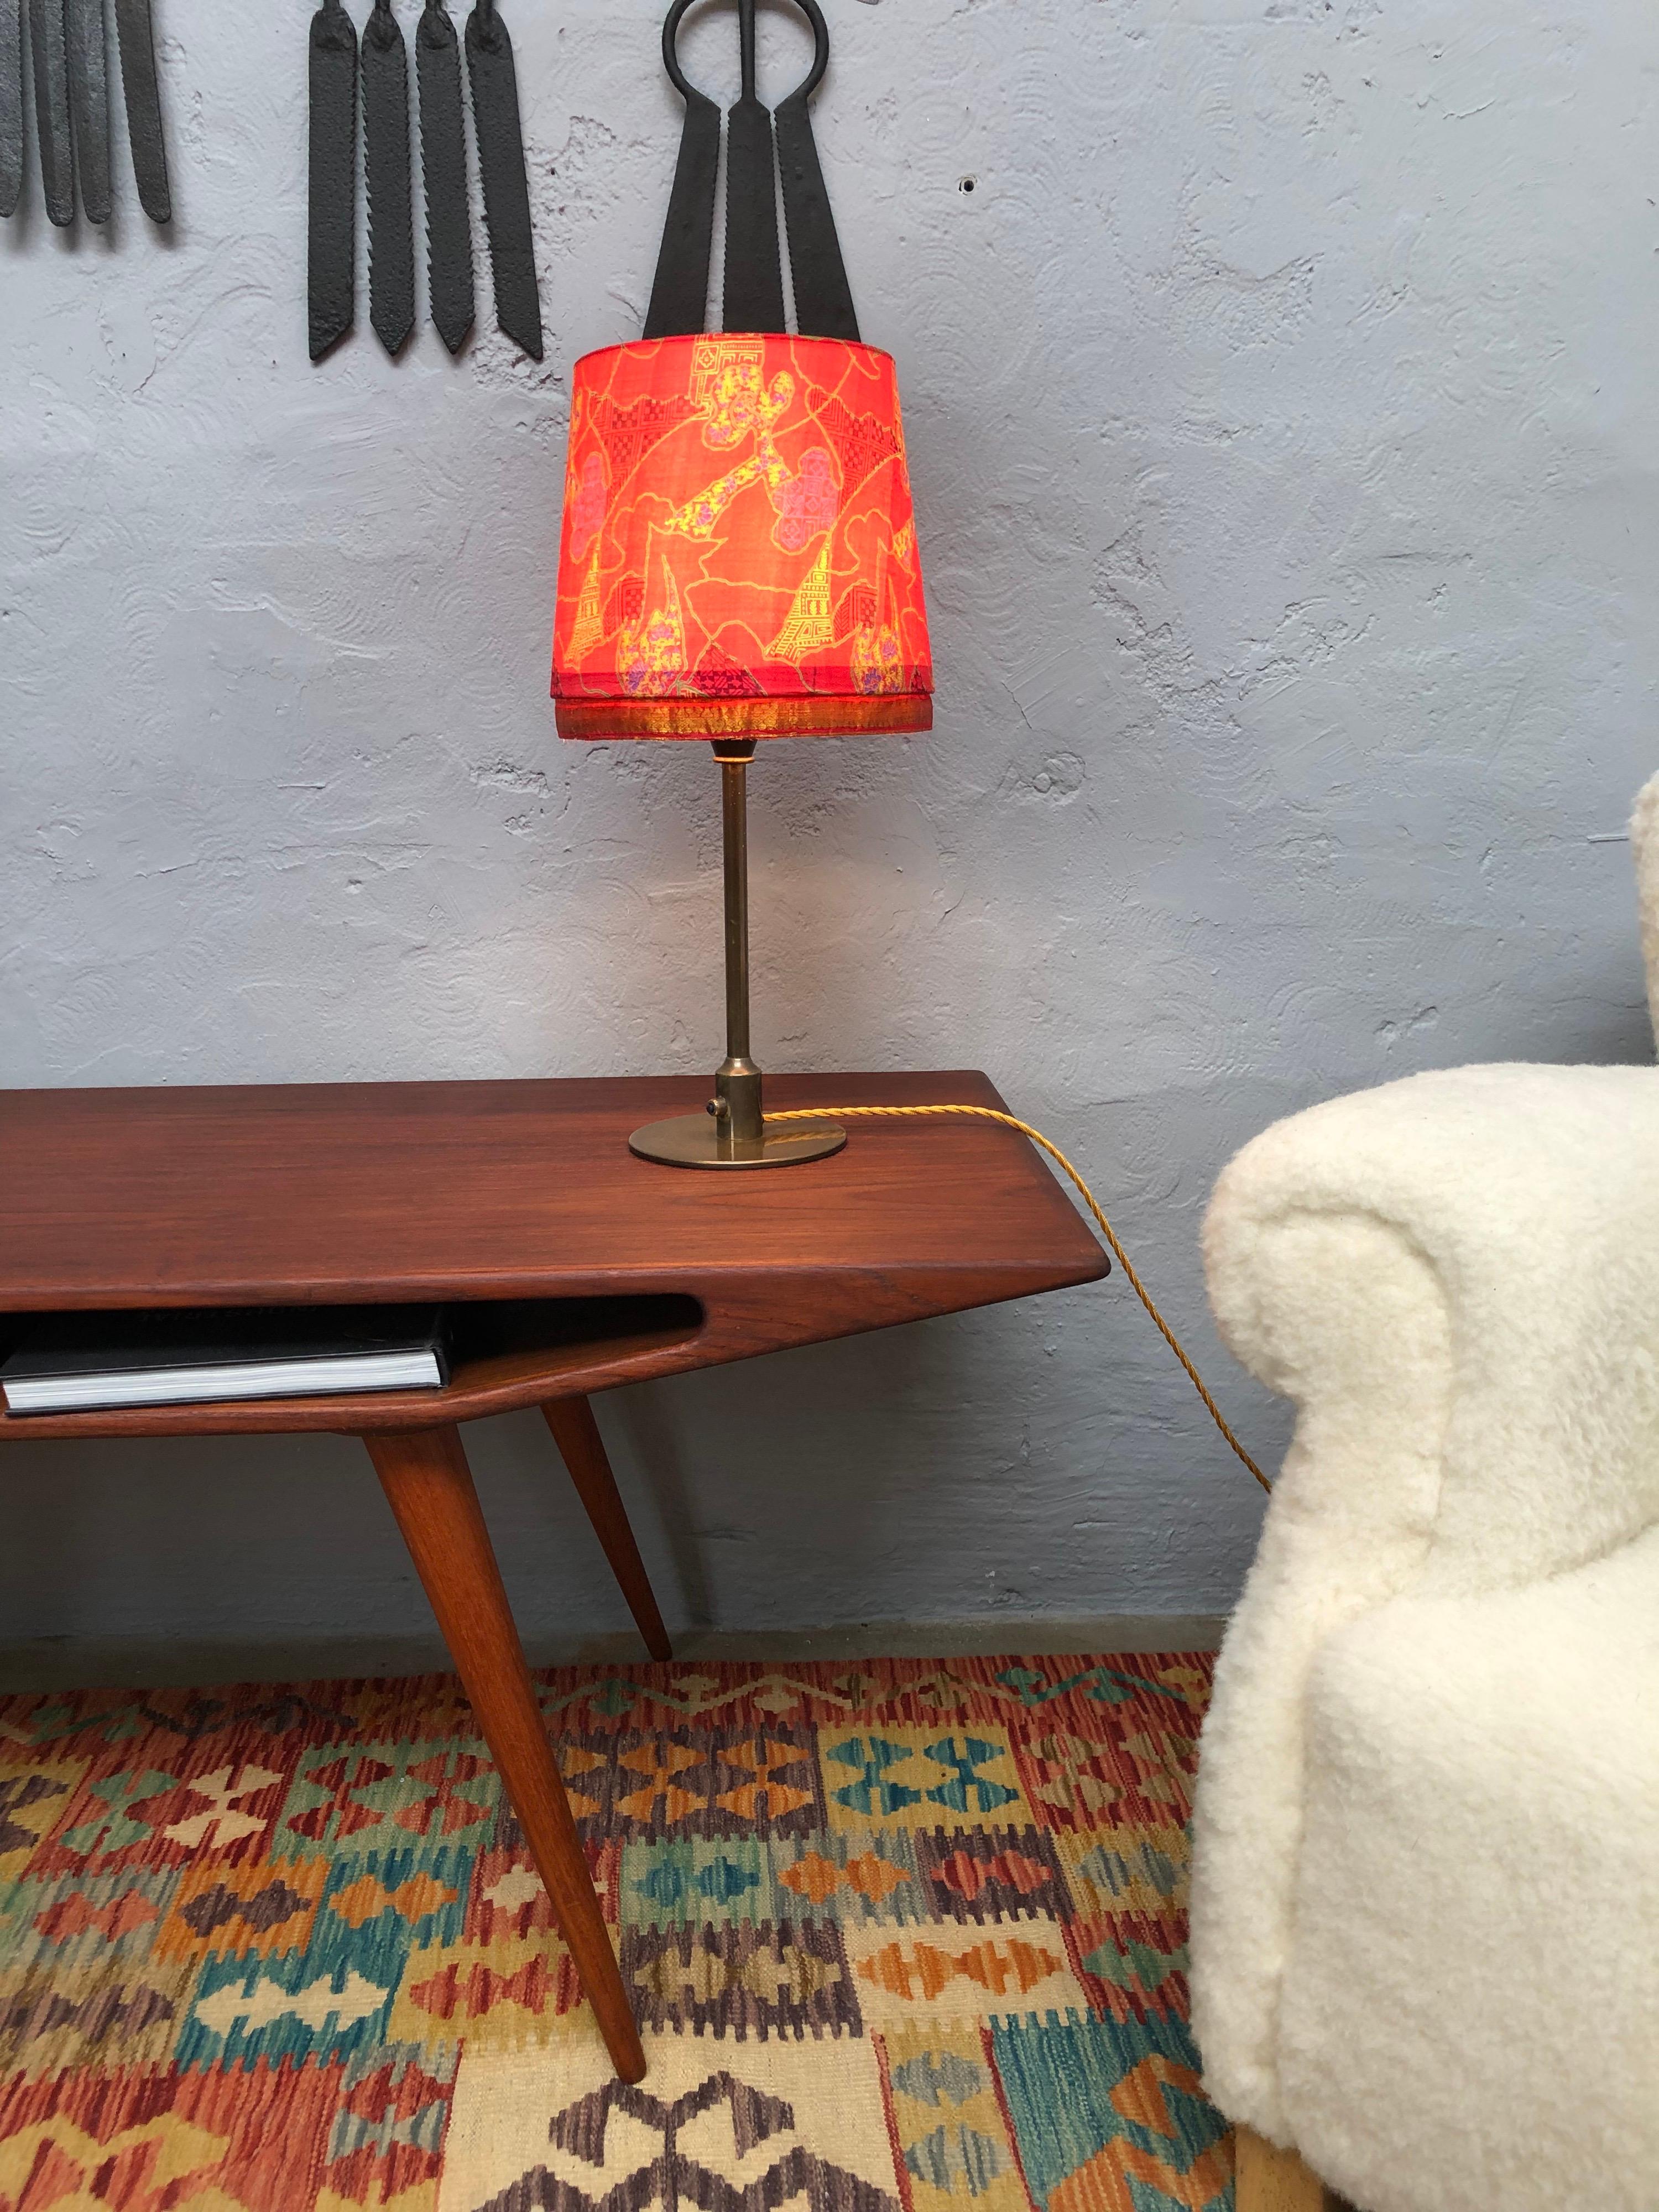 A vintage brass table lamp by Danish lighting company Fog & Mørup from the 1940s in the style of Poul Henningsen. 
The lamp has been dissembled and rewired with a twisted gold cloth flex and grounded. 
This Fog & Mørup table lamp has also been